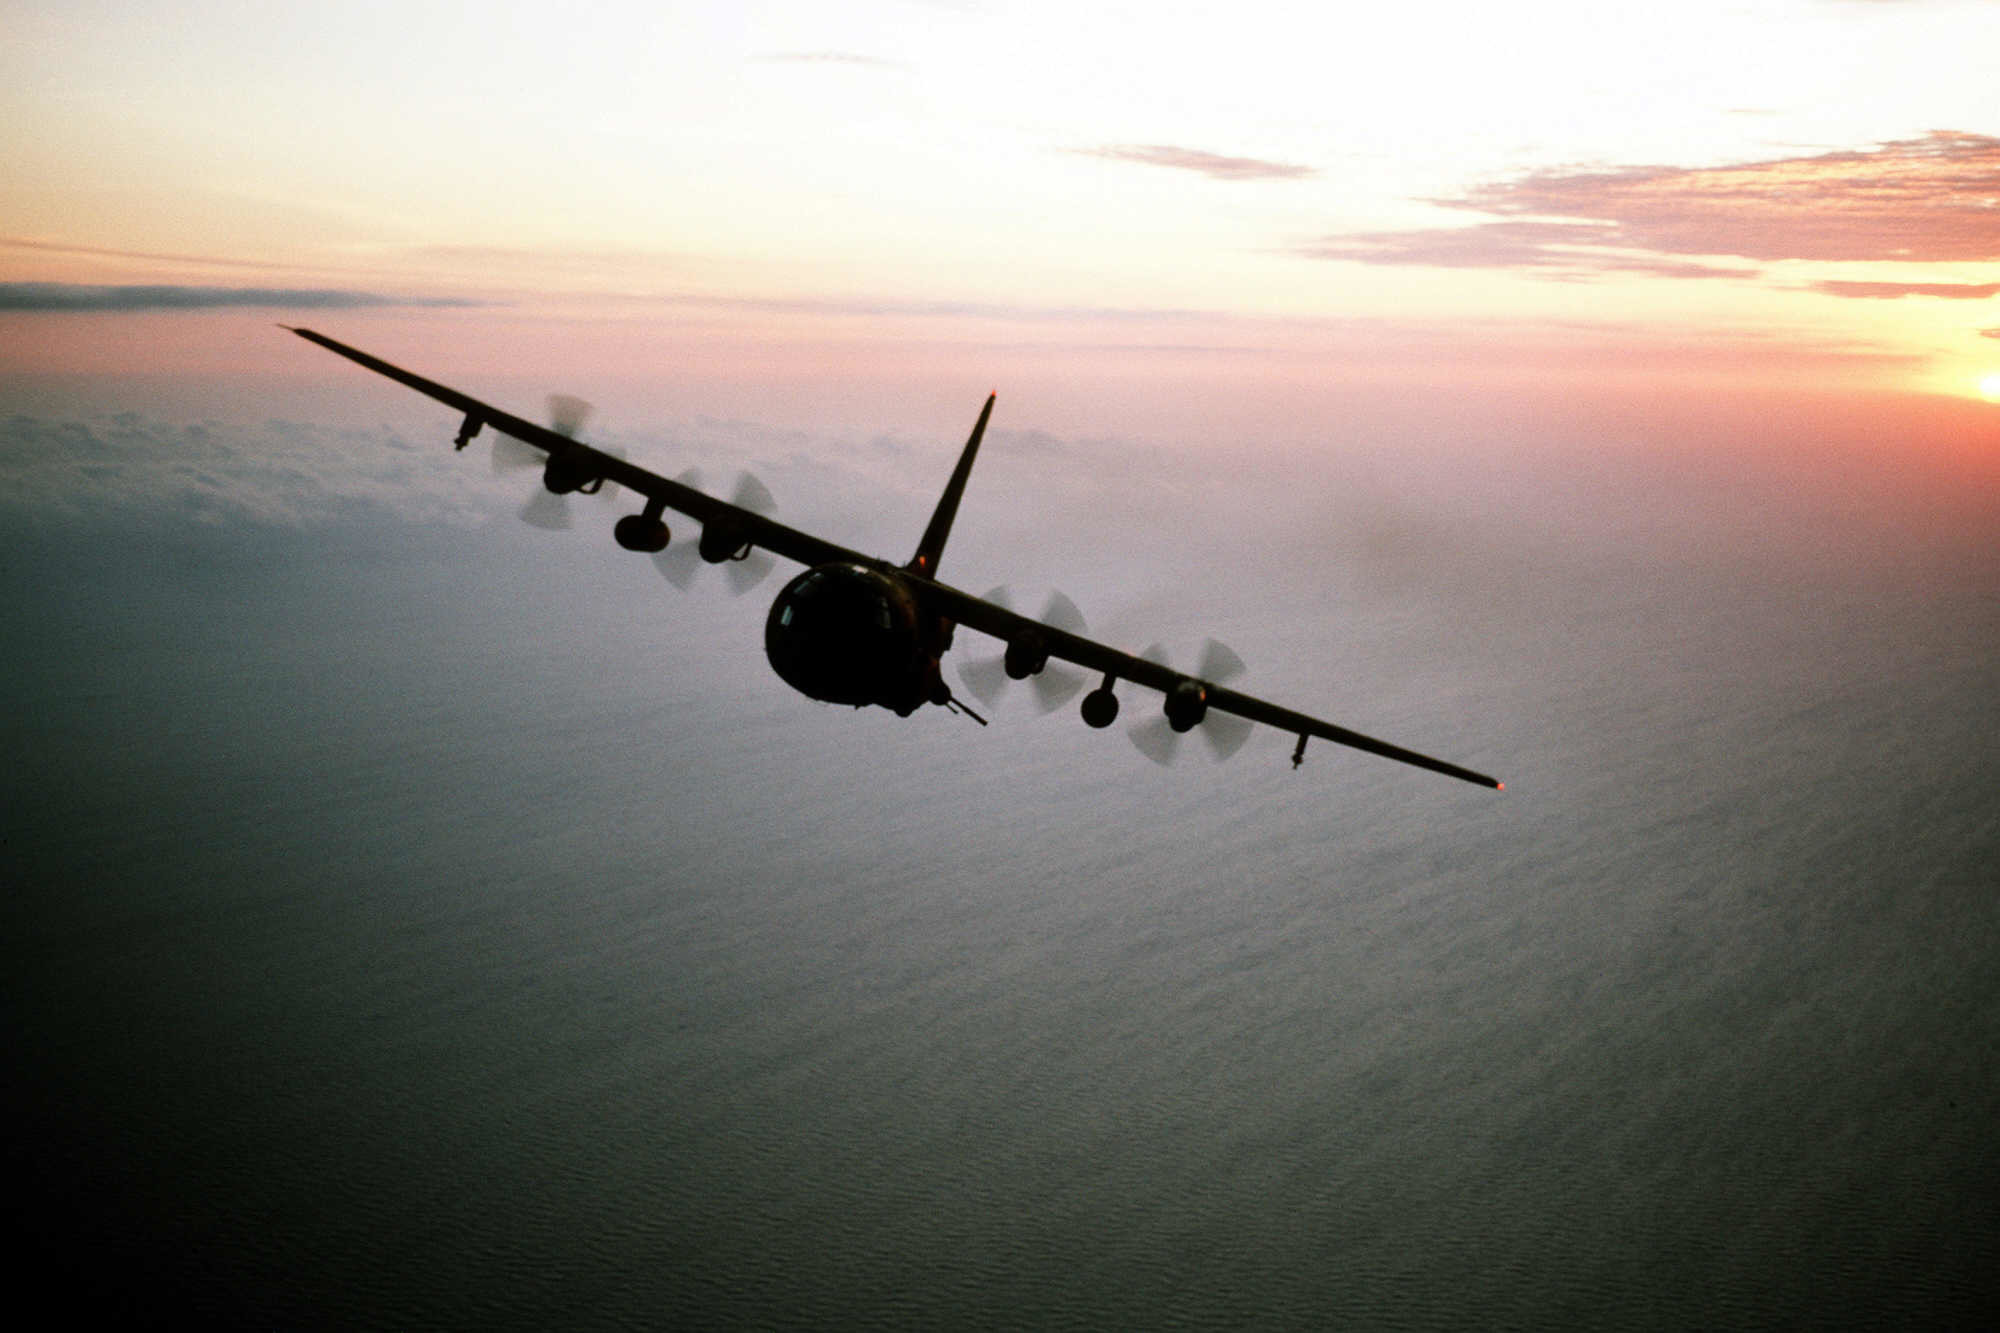 2000x1333 Showing Gallery For AC 130 Spectre Wallpaper 2000x1333.